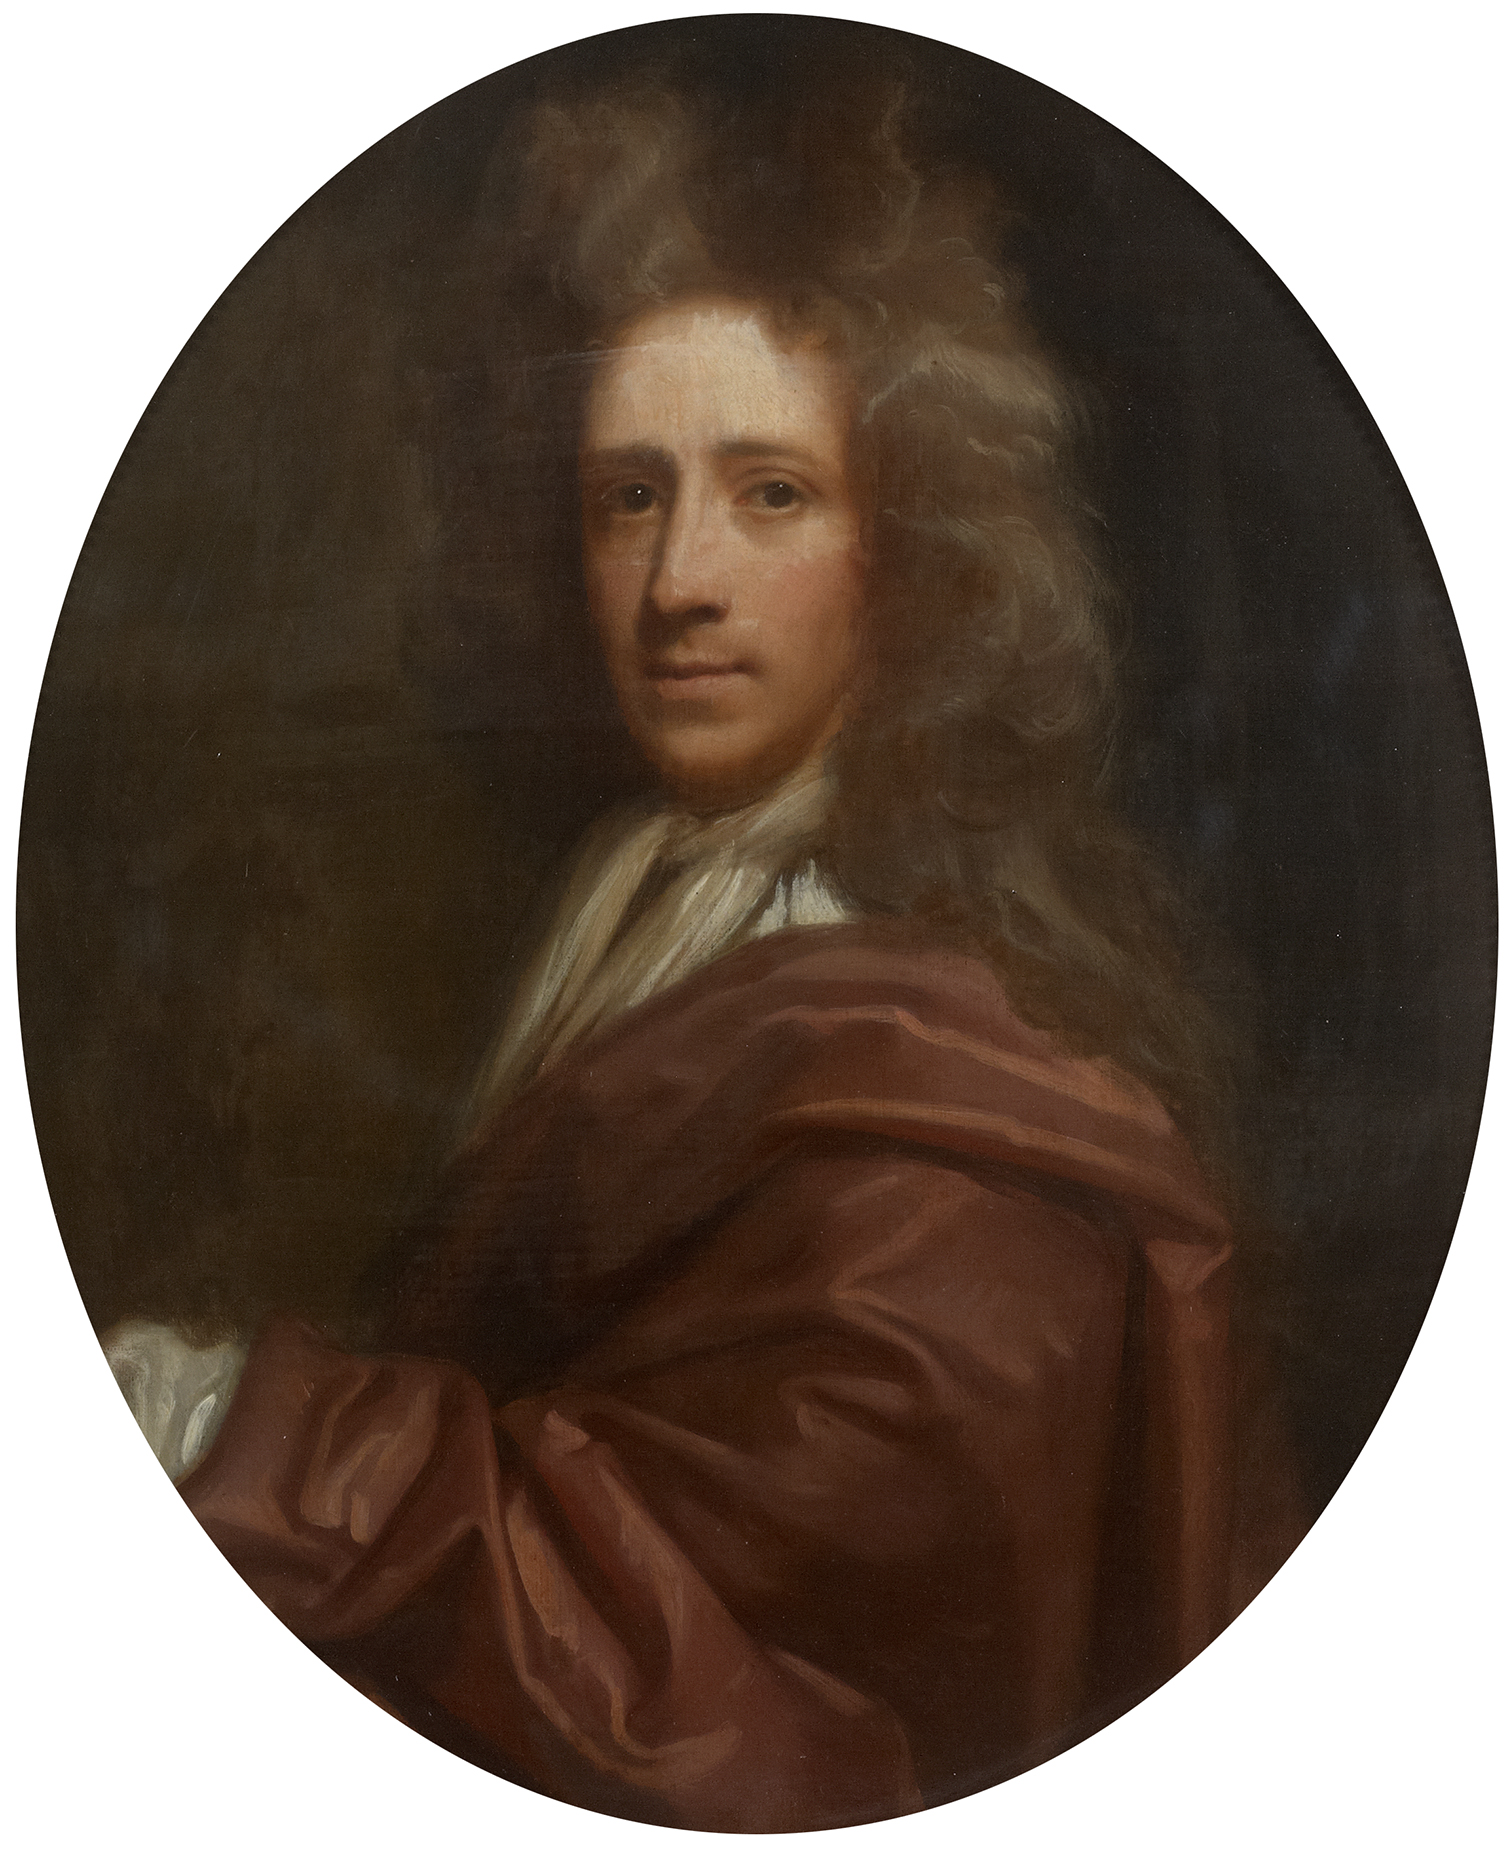 Portrait of Richard Waller by Thomas Murray (ca. early 18th century) ©The Royal Society